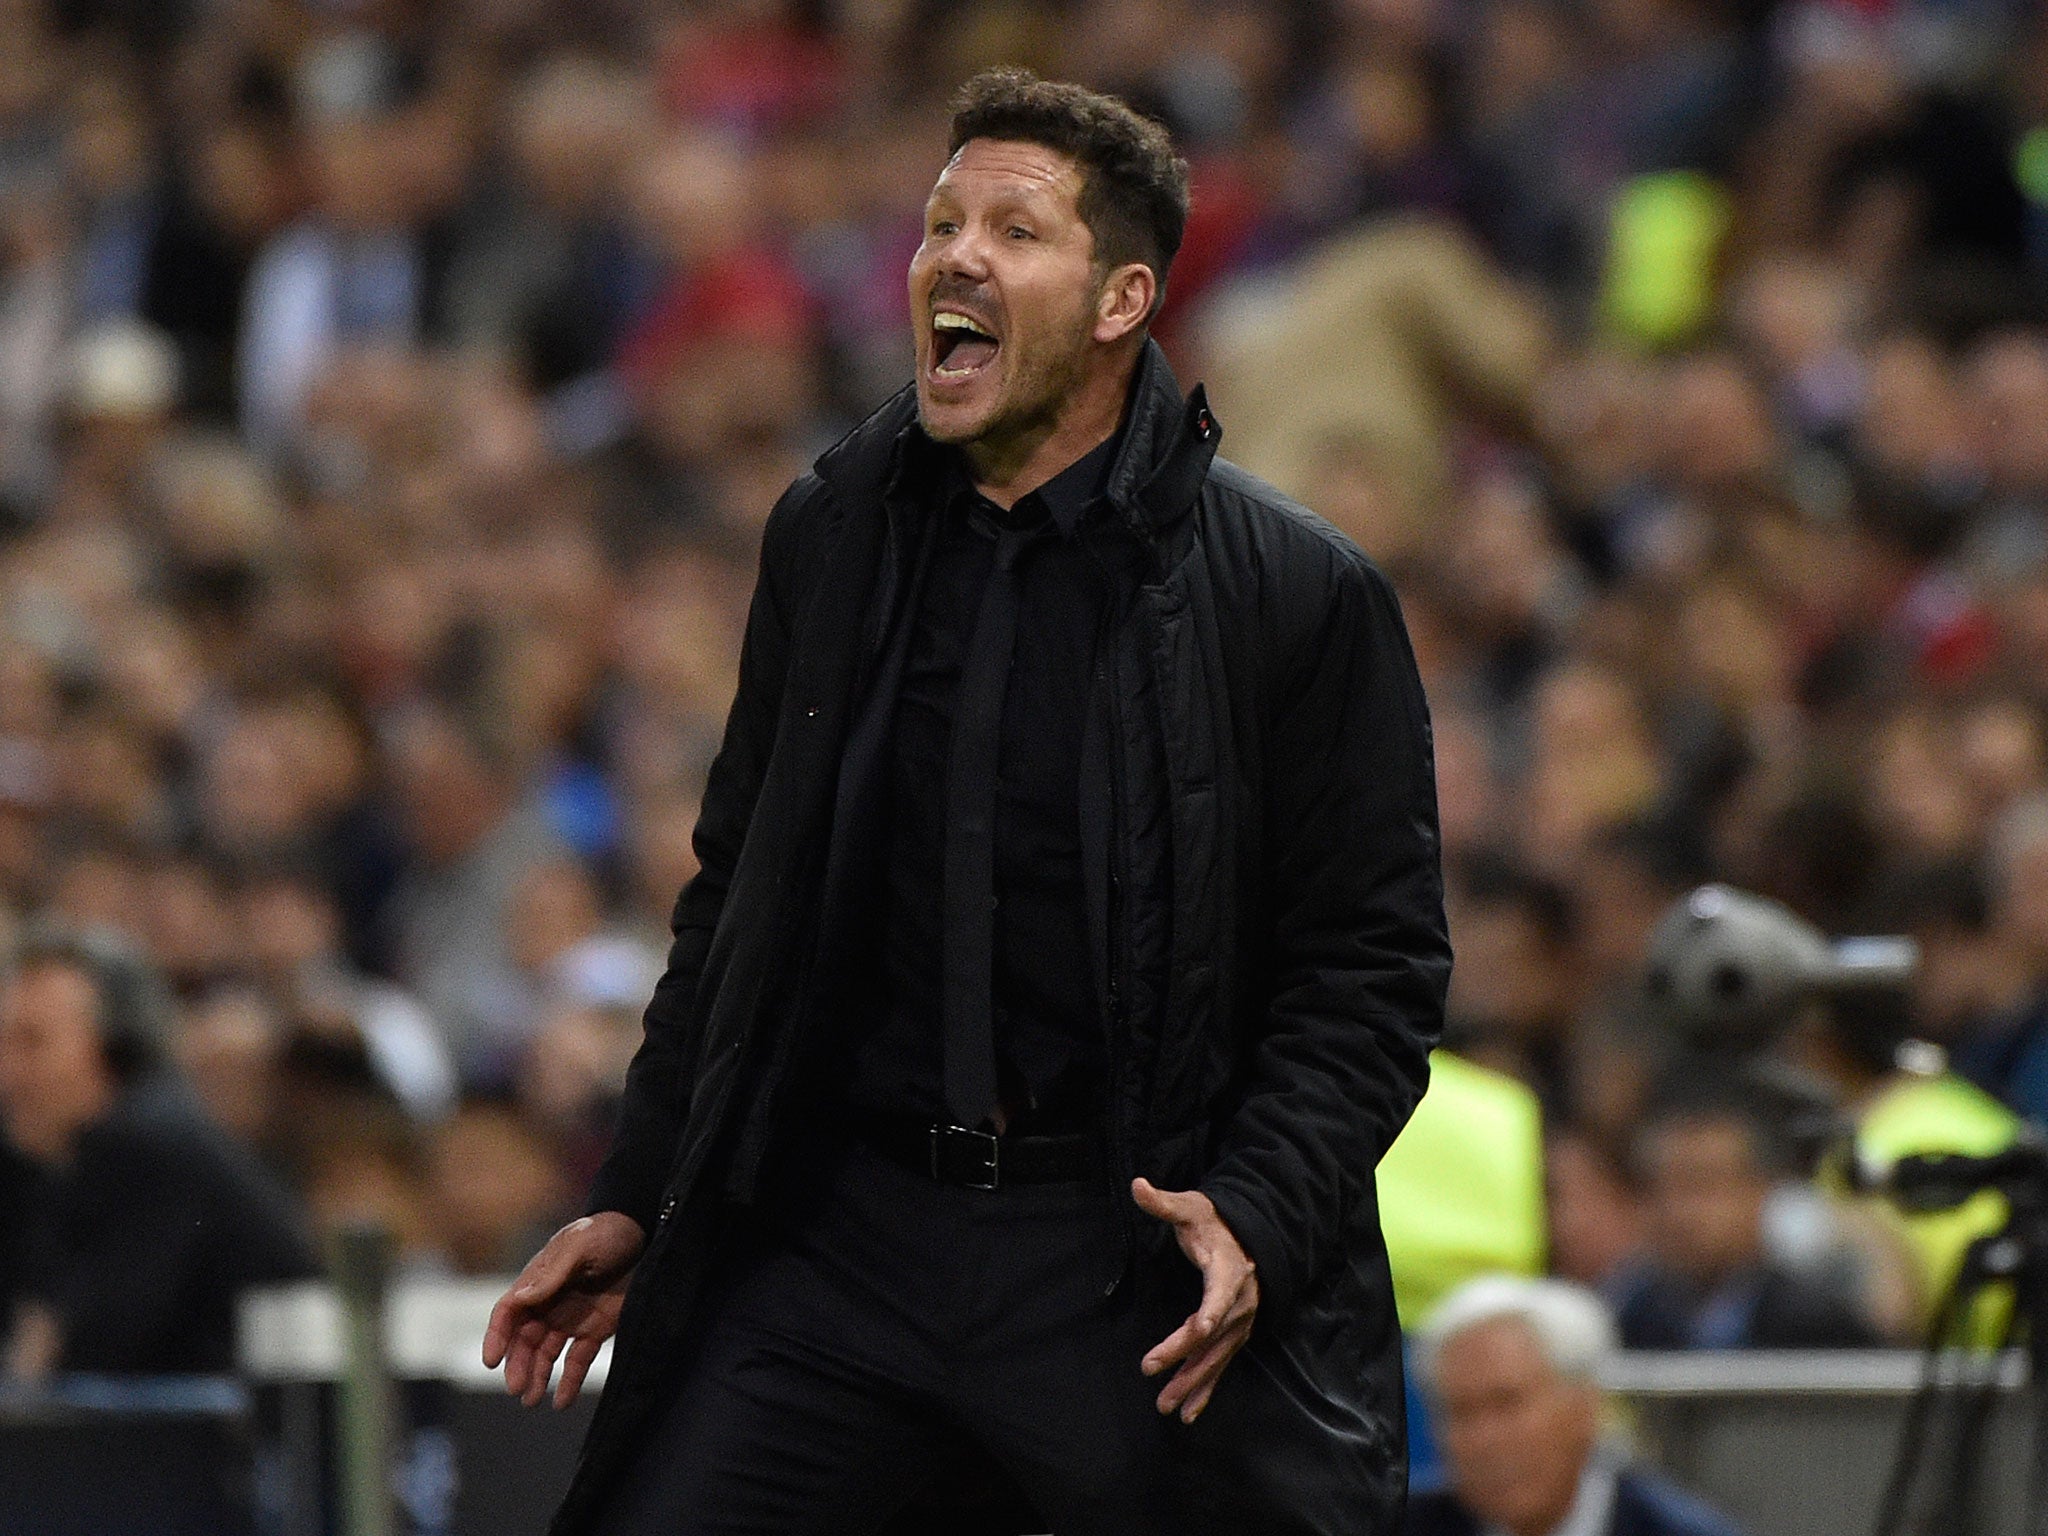 Diego Simeone has signed a new contract with Atletico until 2020